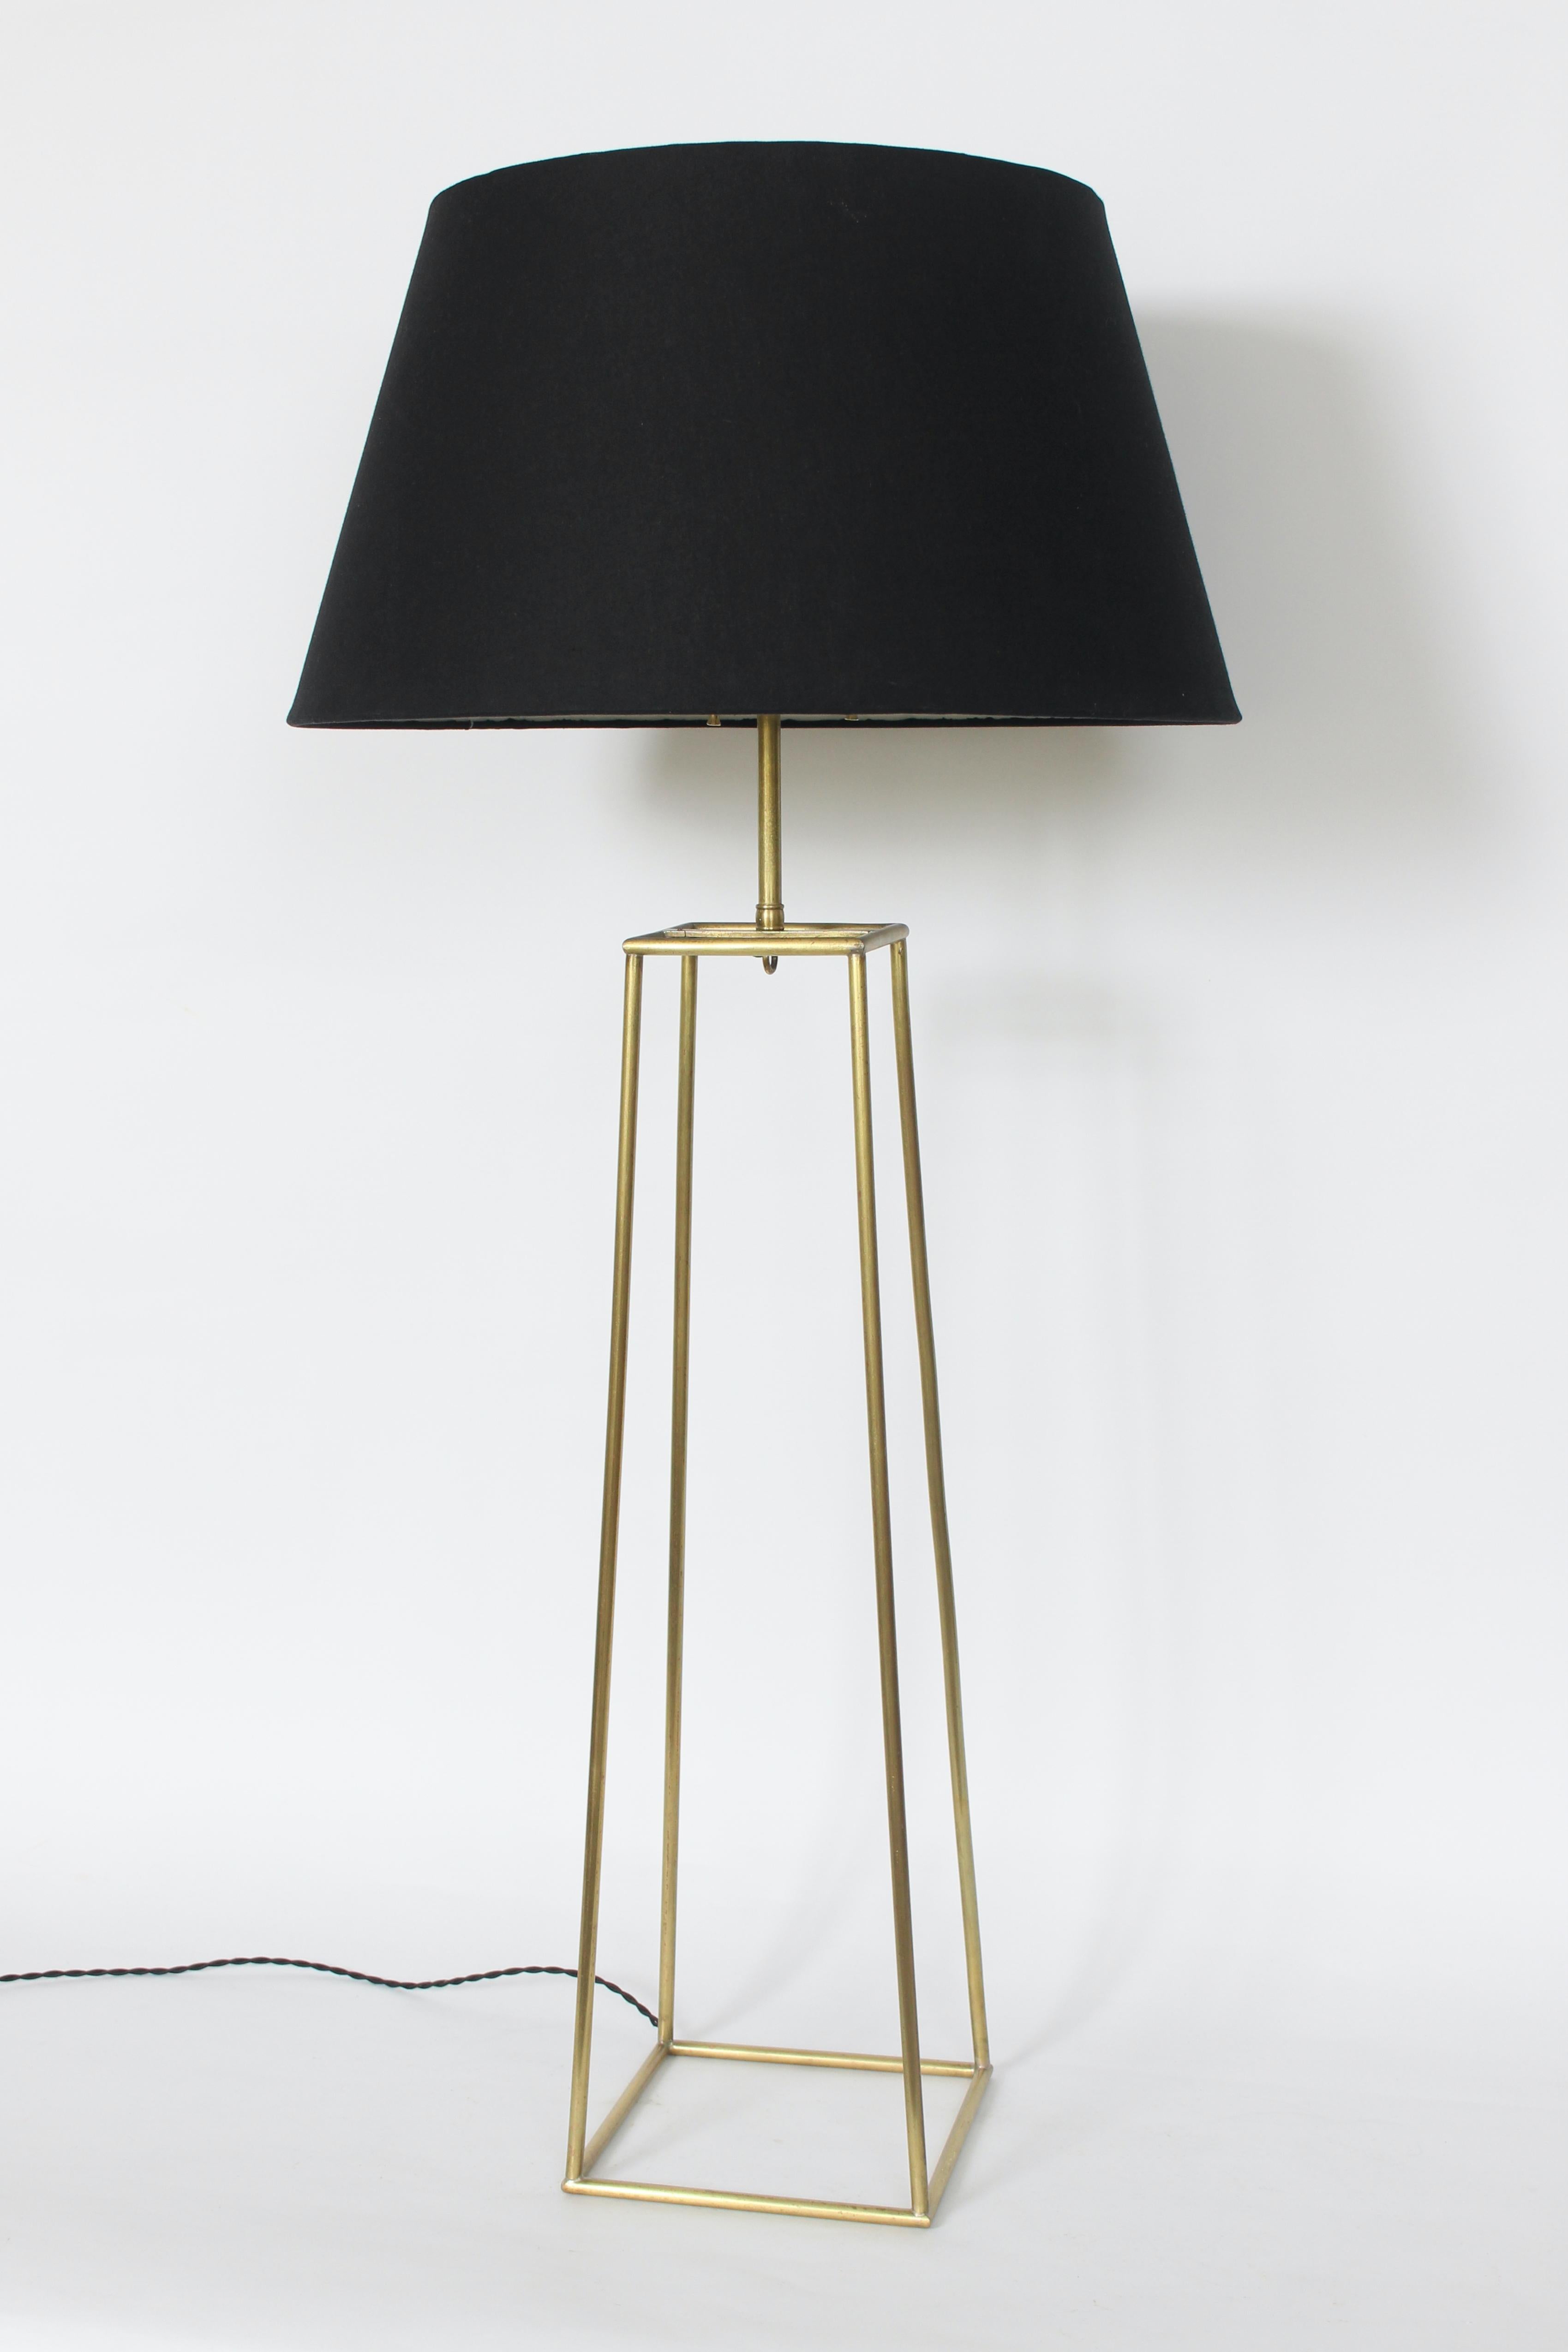 Plated Substantial Tommi Parzinger Style Brass Open Box Form Table Lamp, 1950s For Sale